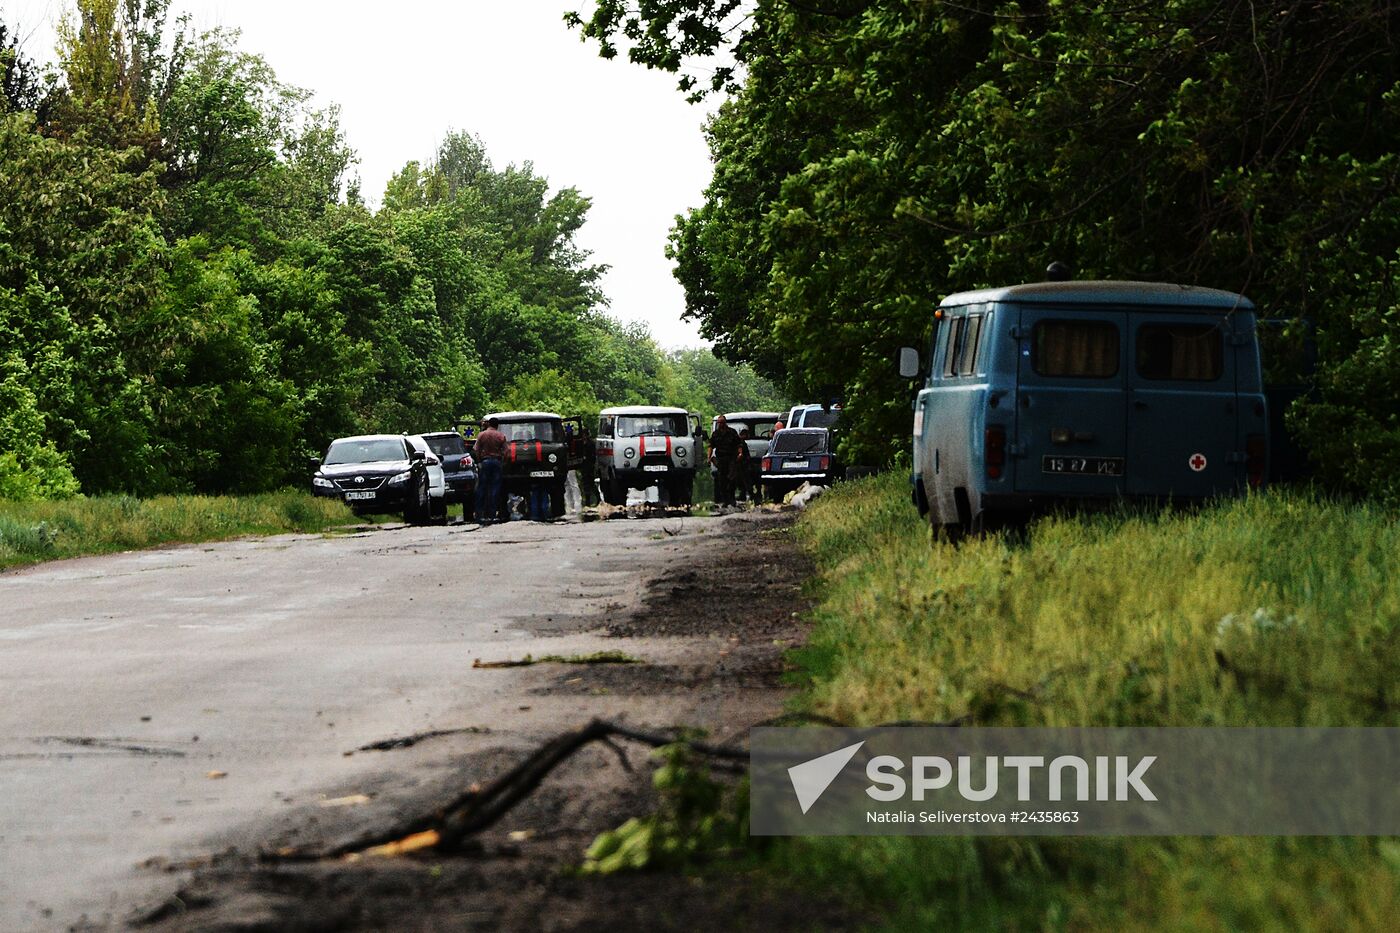 Ukraine's National Guard checkpoint assaulted by unidentified persons